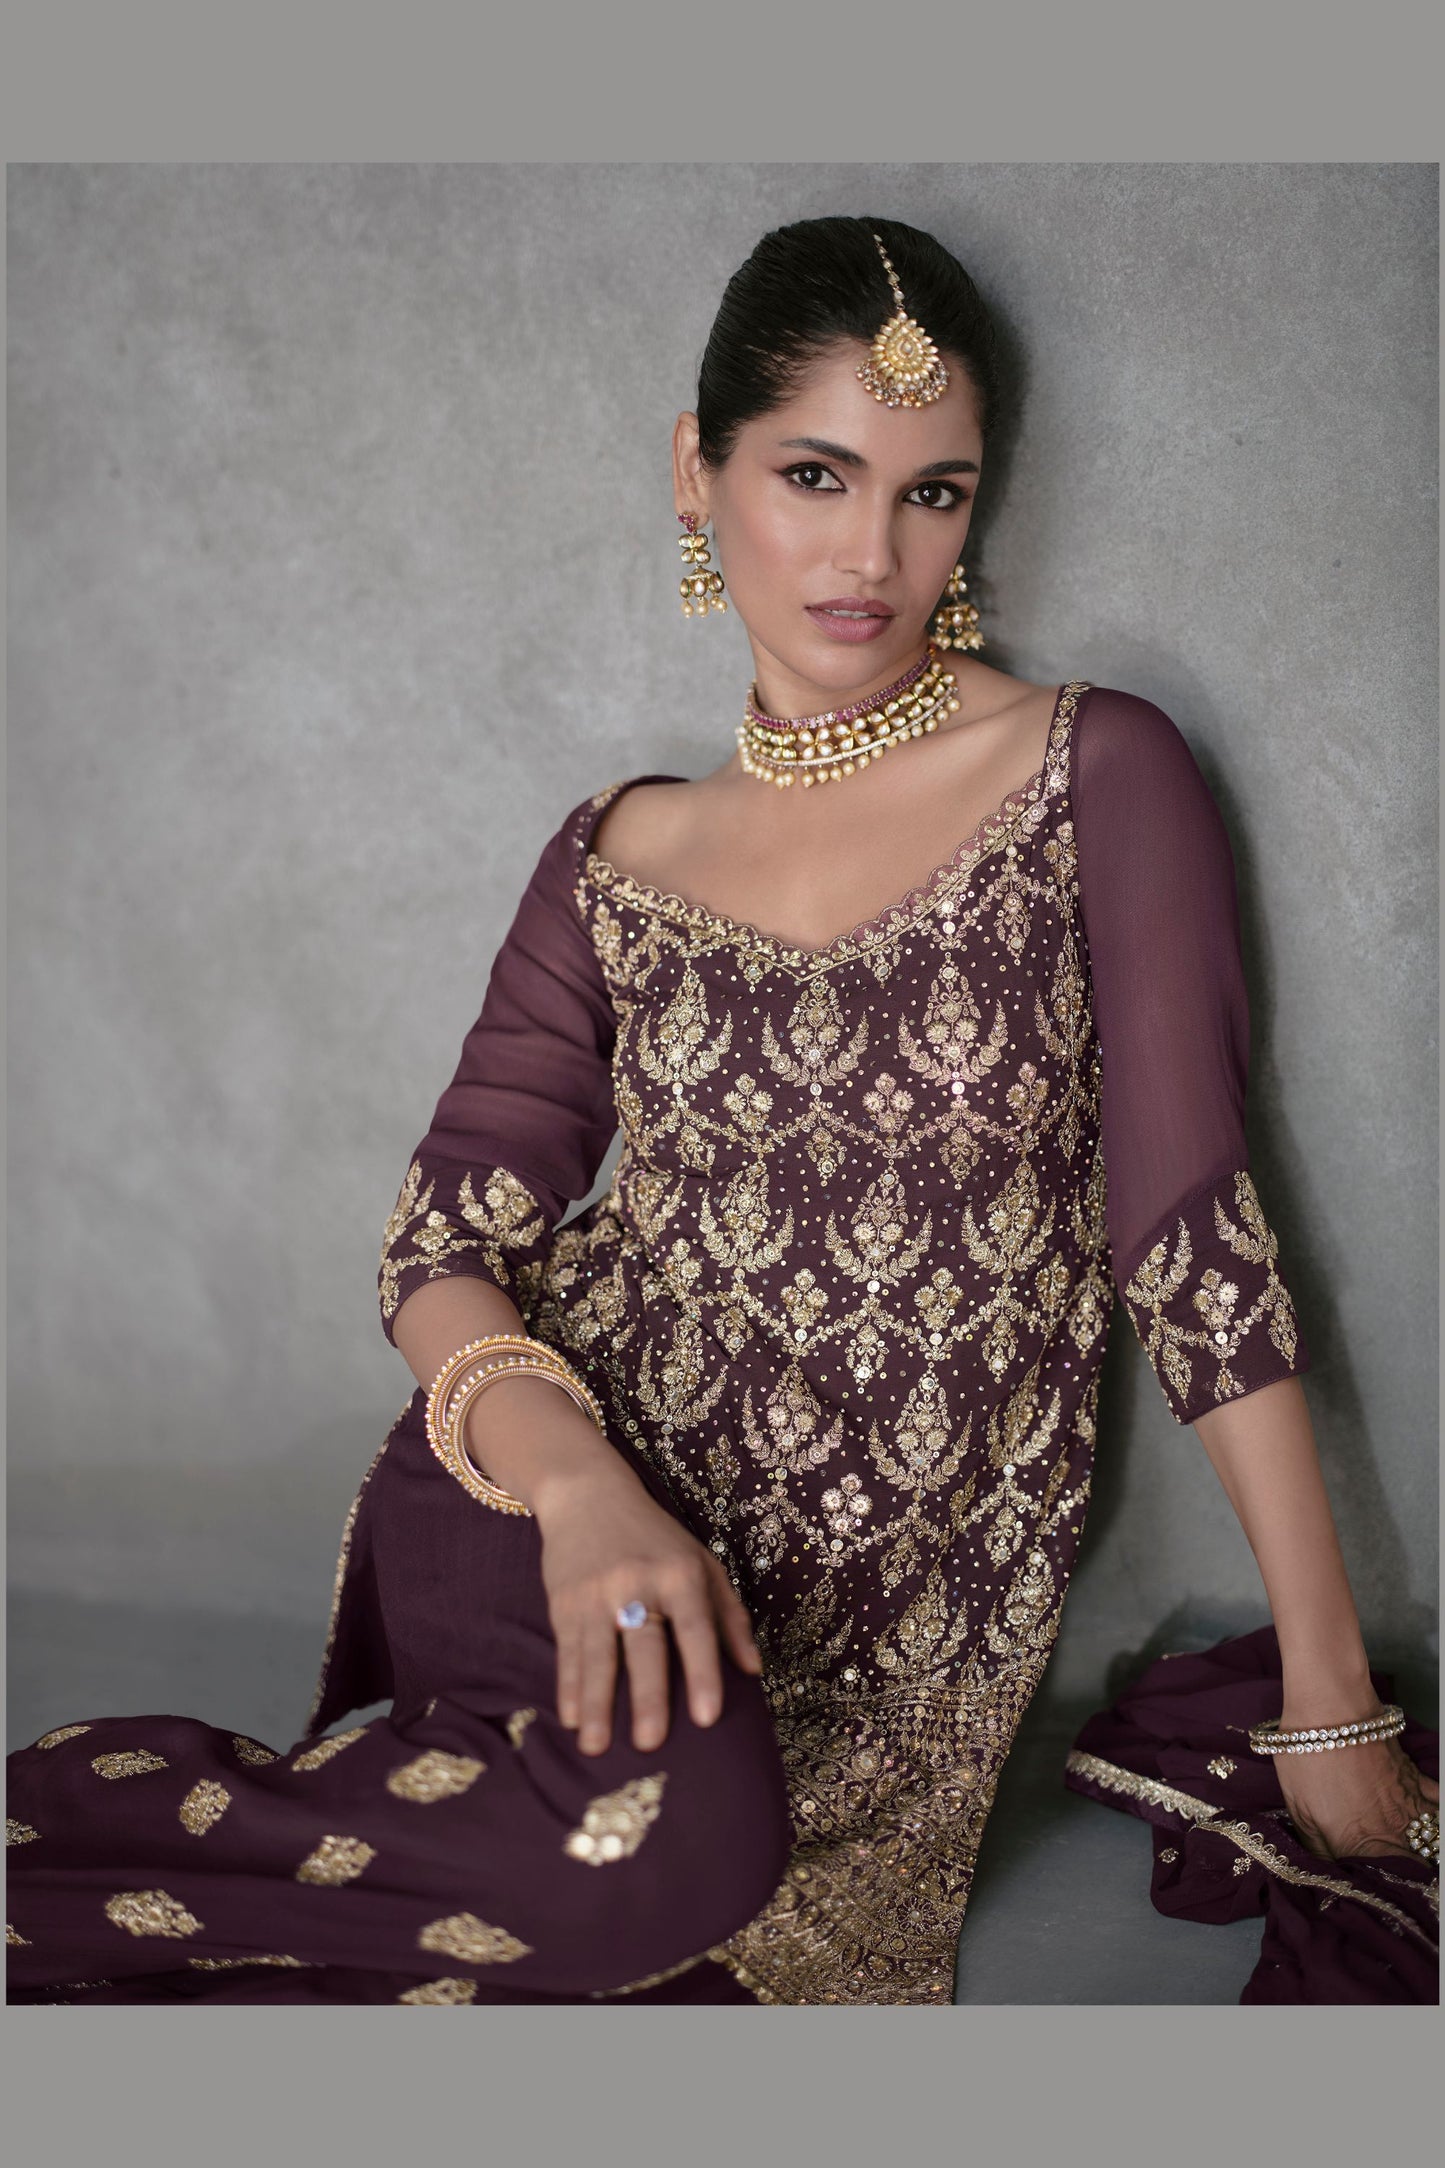 Brown Georgette Plazo Suit For Indian Festivals & Pakistani Weddings - Thread Embroidery Work